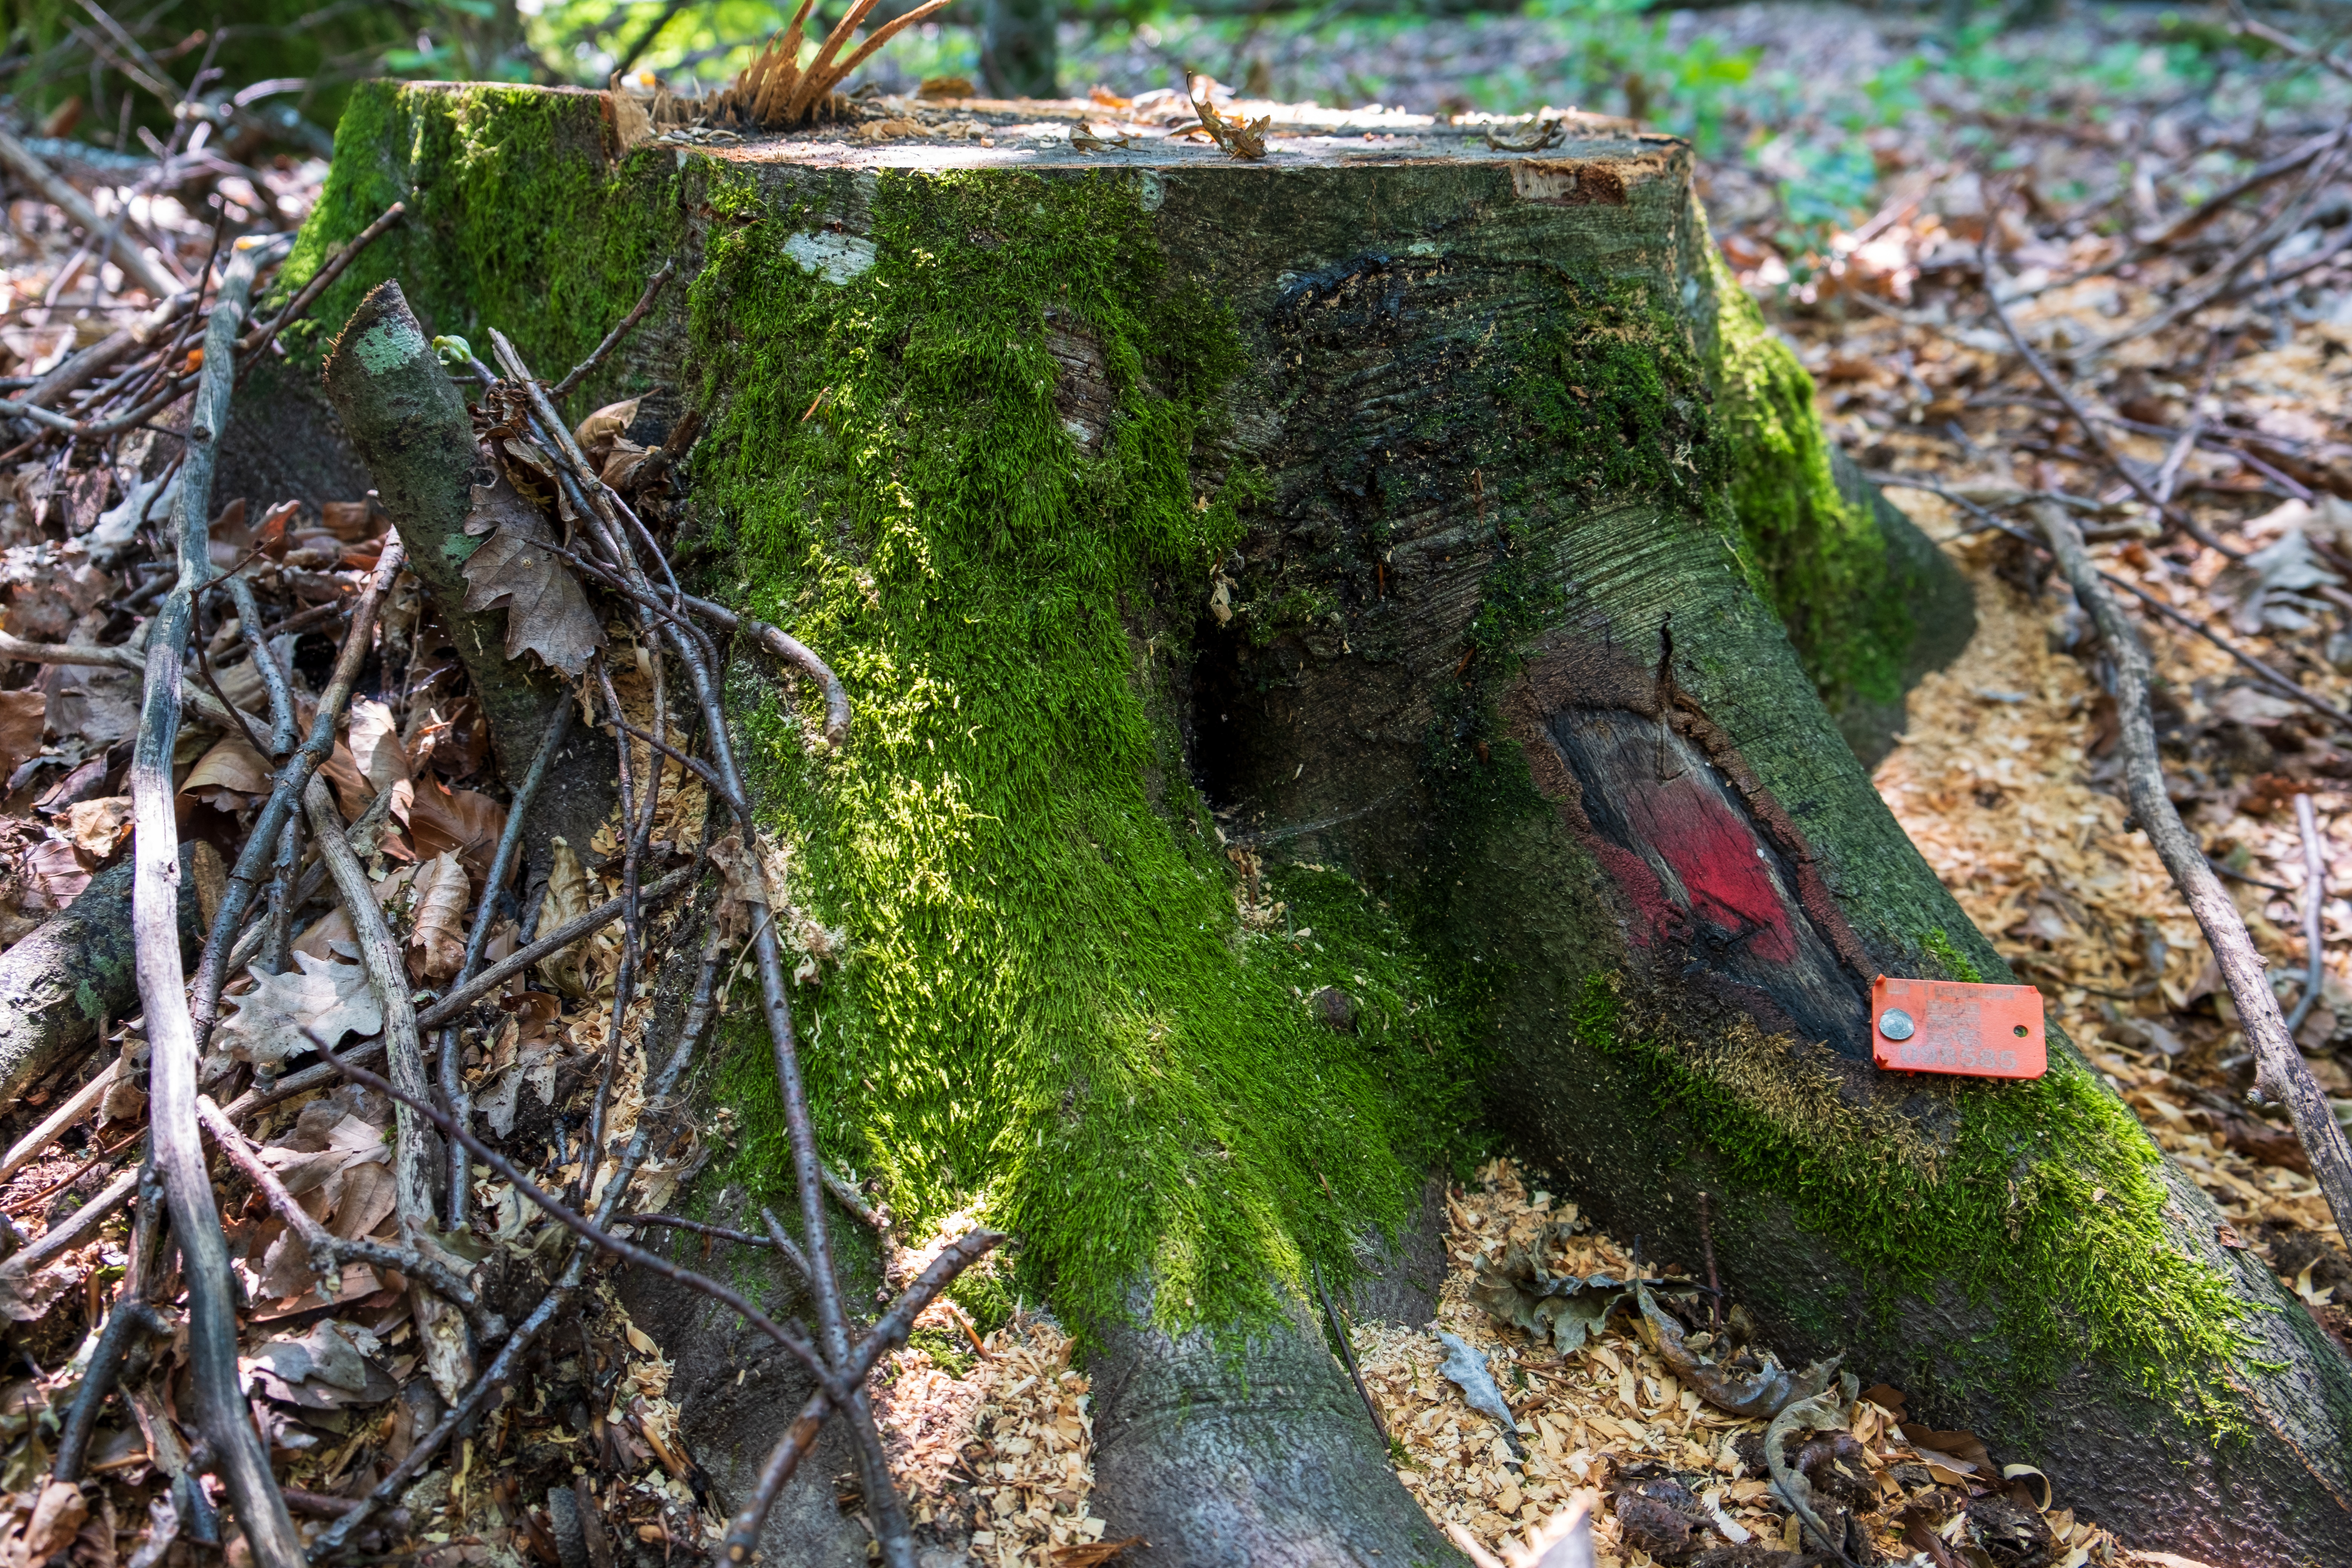 A tree stump with a tag